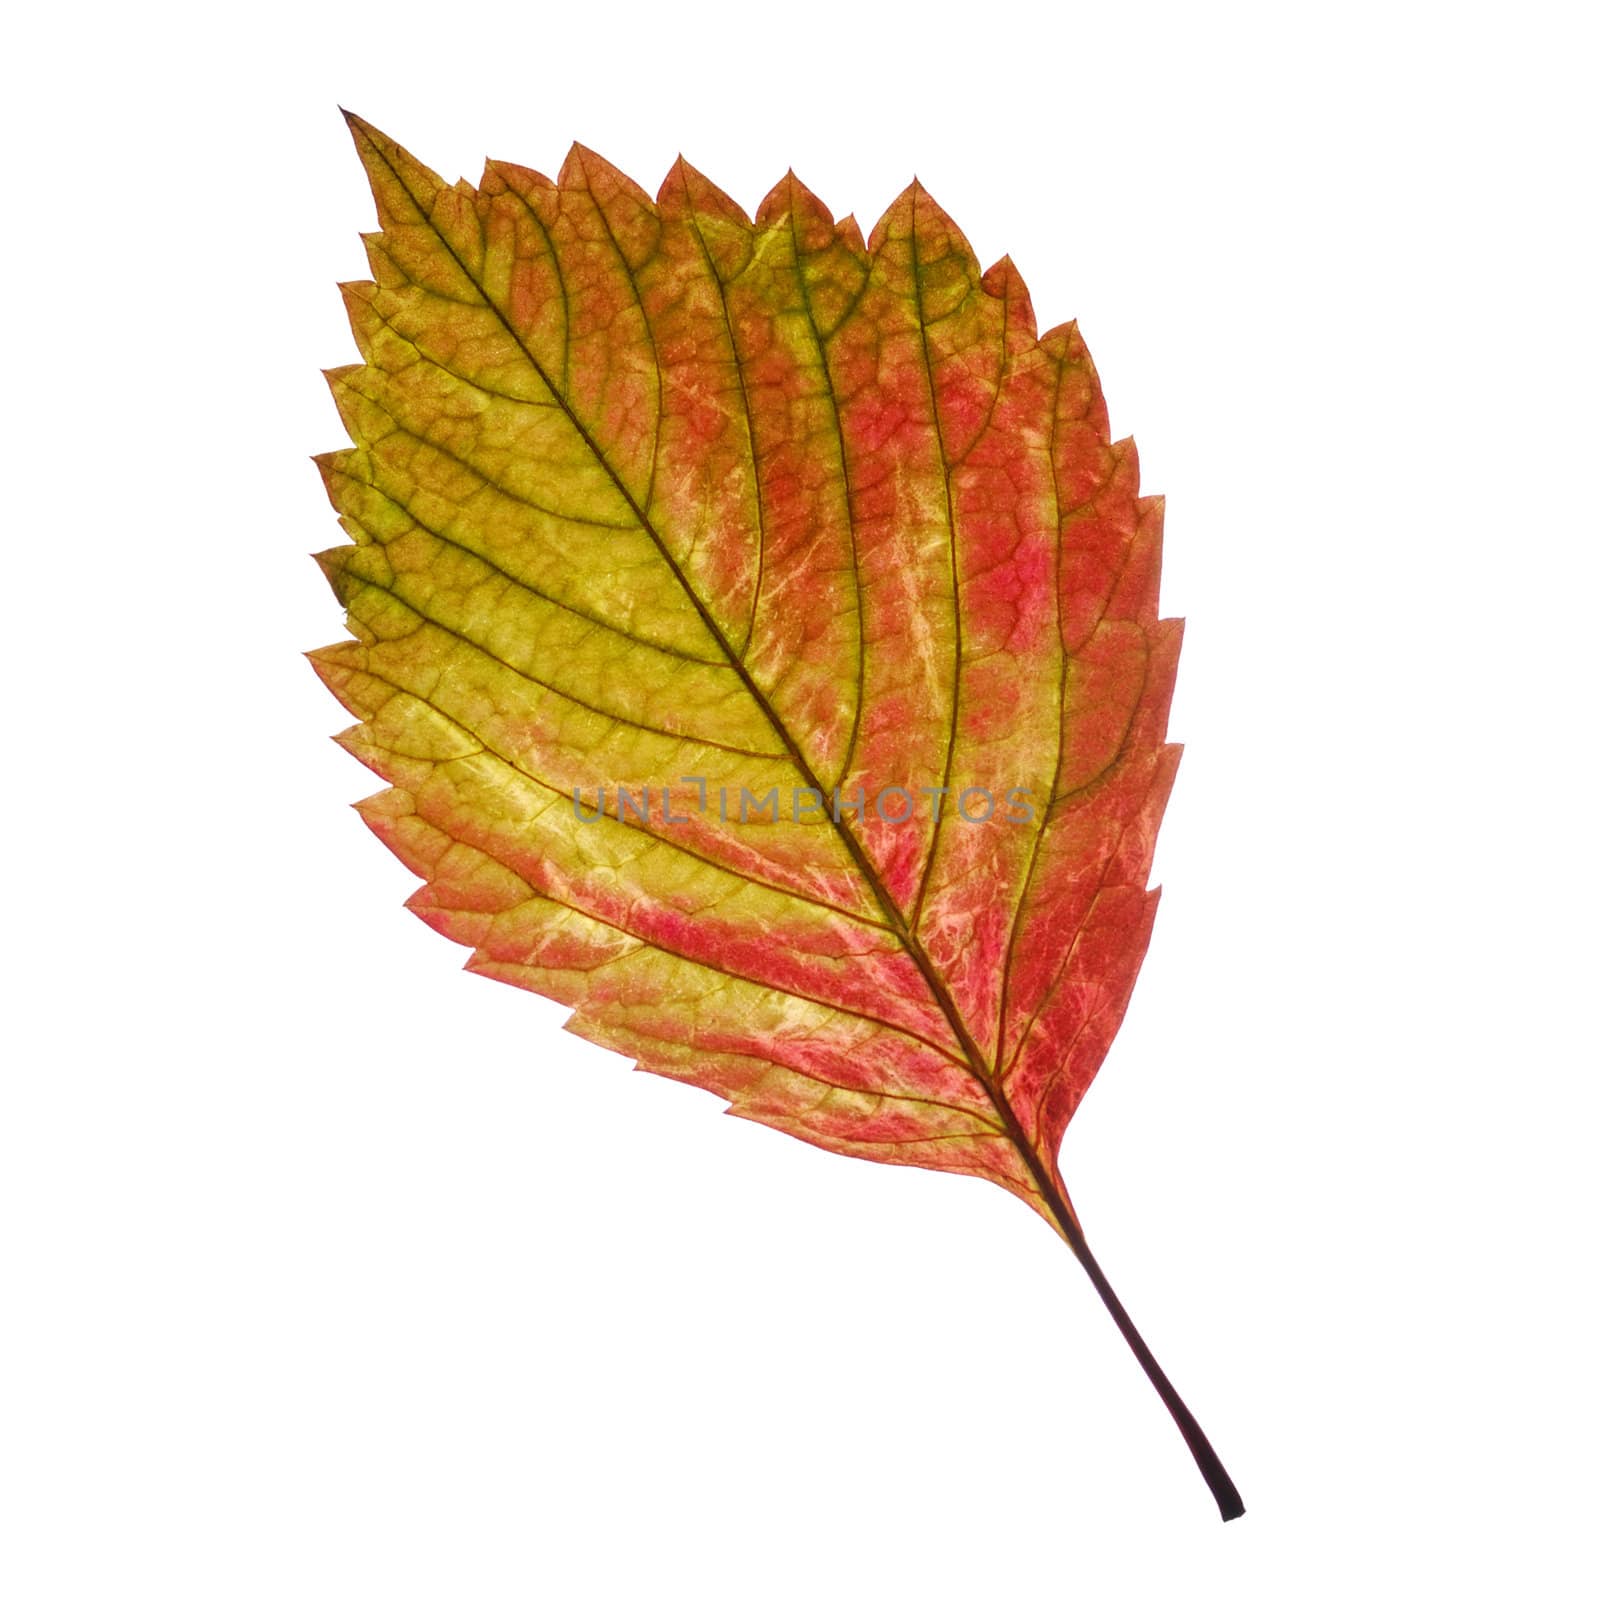 one leaf. It is isolated on a white background.